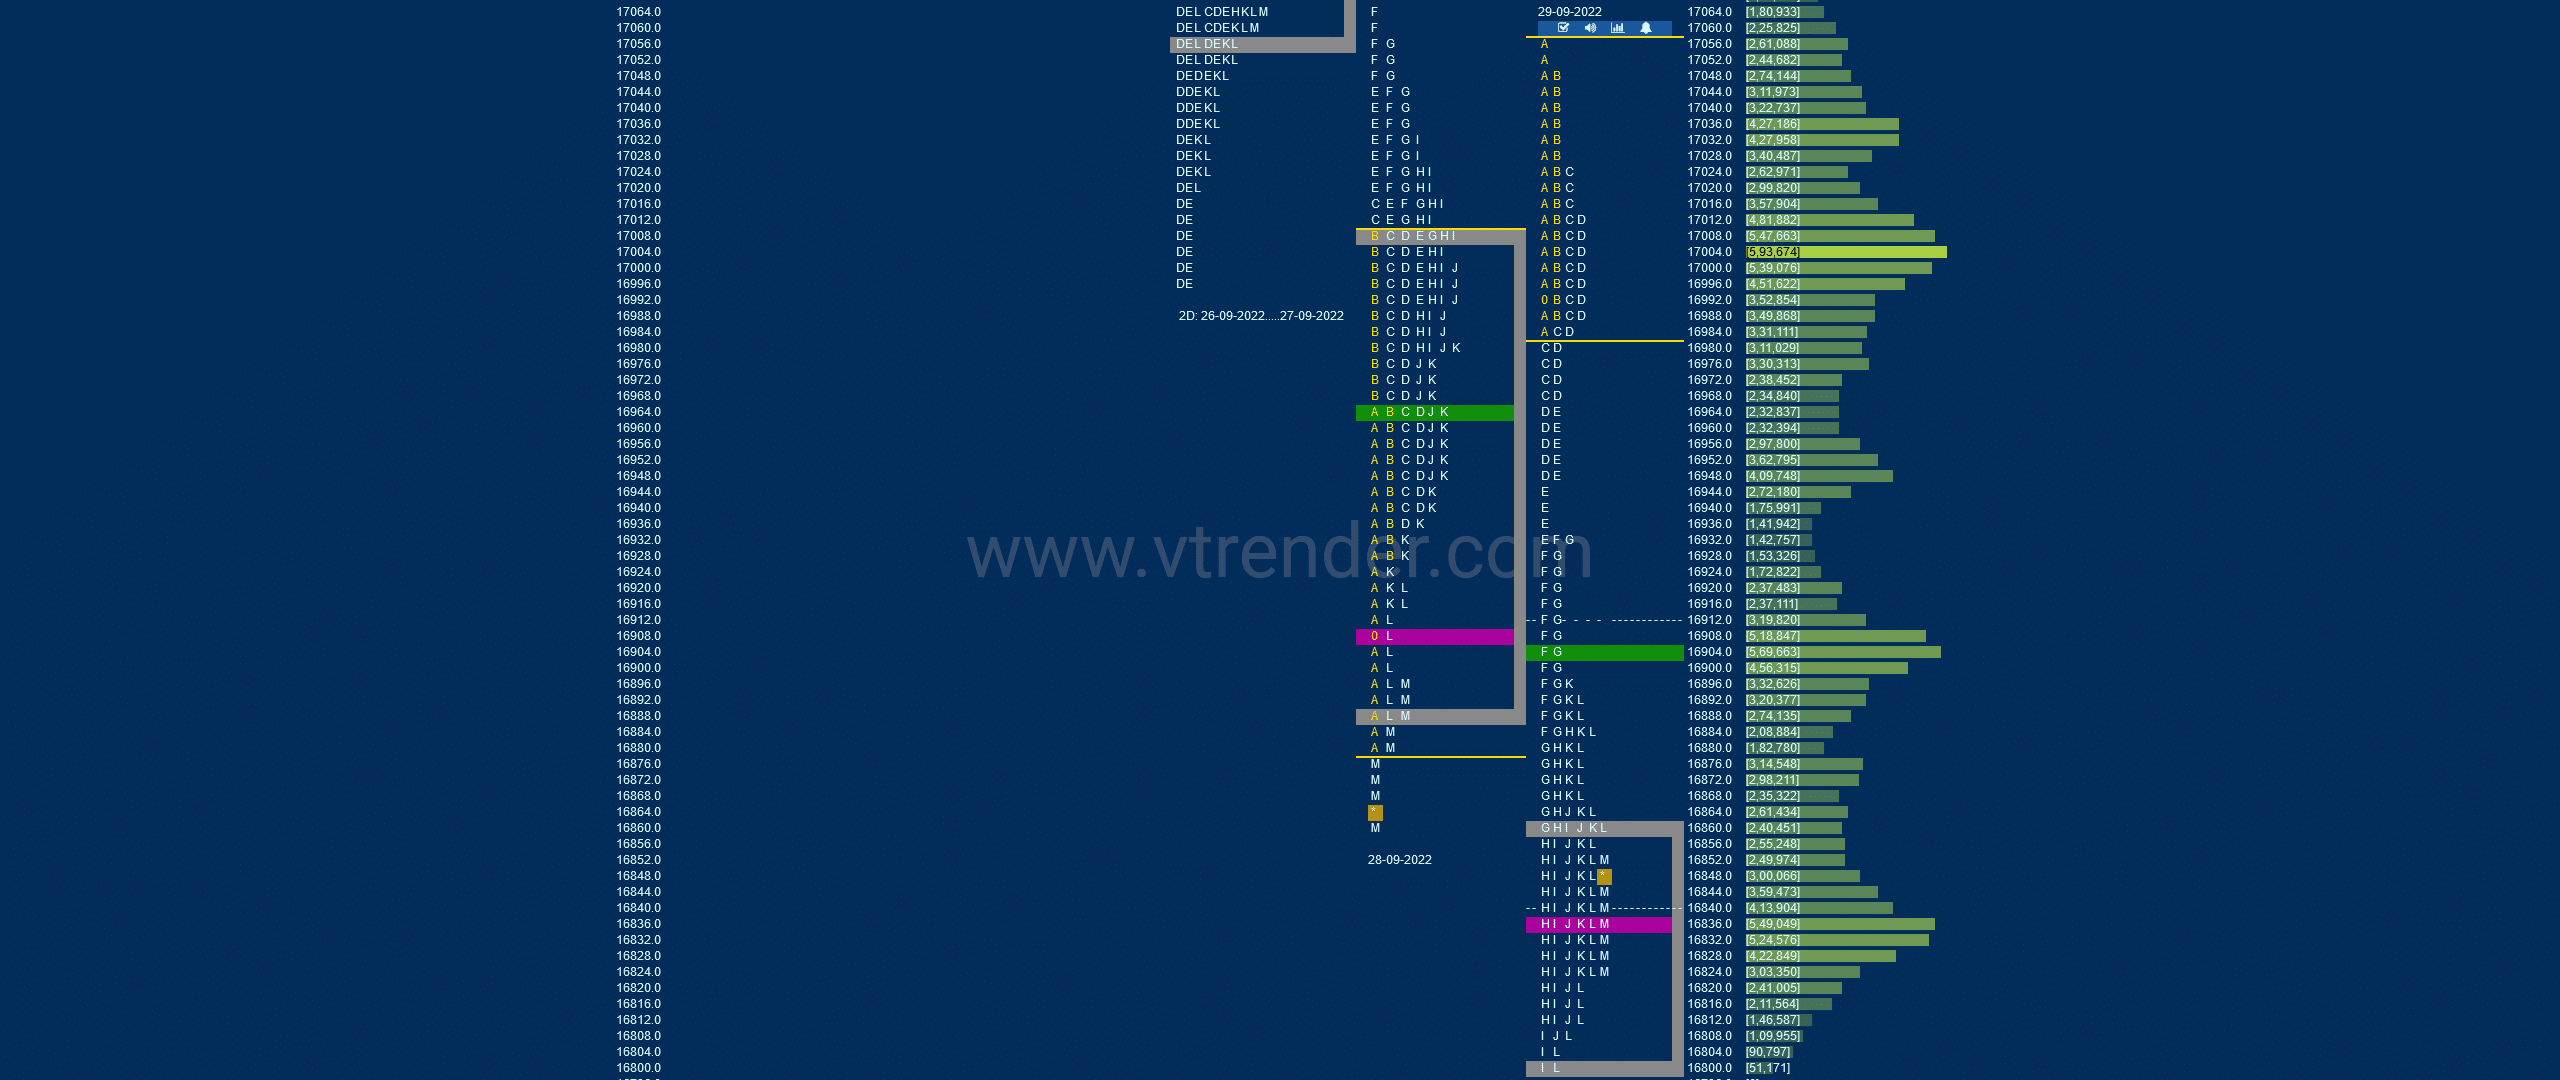 Nf 20 Market Profile Analysis Dated 29Th Sep 2022 Banknifty Futures, Charts, Day Trading, Intraday Trading, Intraday Trading Strategies, Market Profile, Market Profile Trading Strategies, Nifty Futures, Order Flow Analysis, Support And Resistance, Technical Analysis, Trading Strategies, Volume Profile Trading